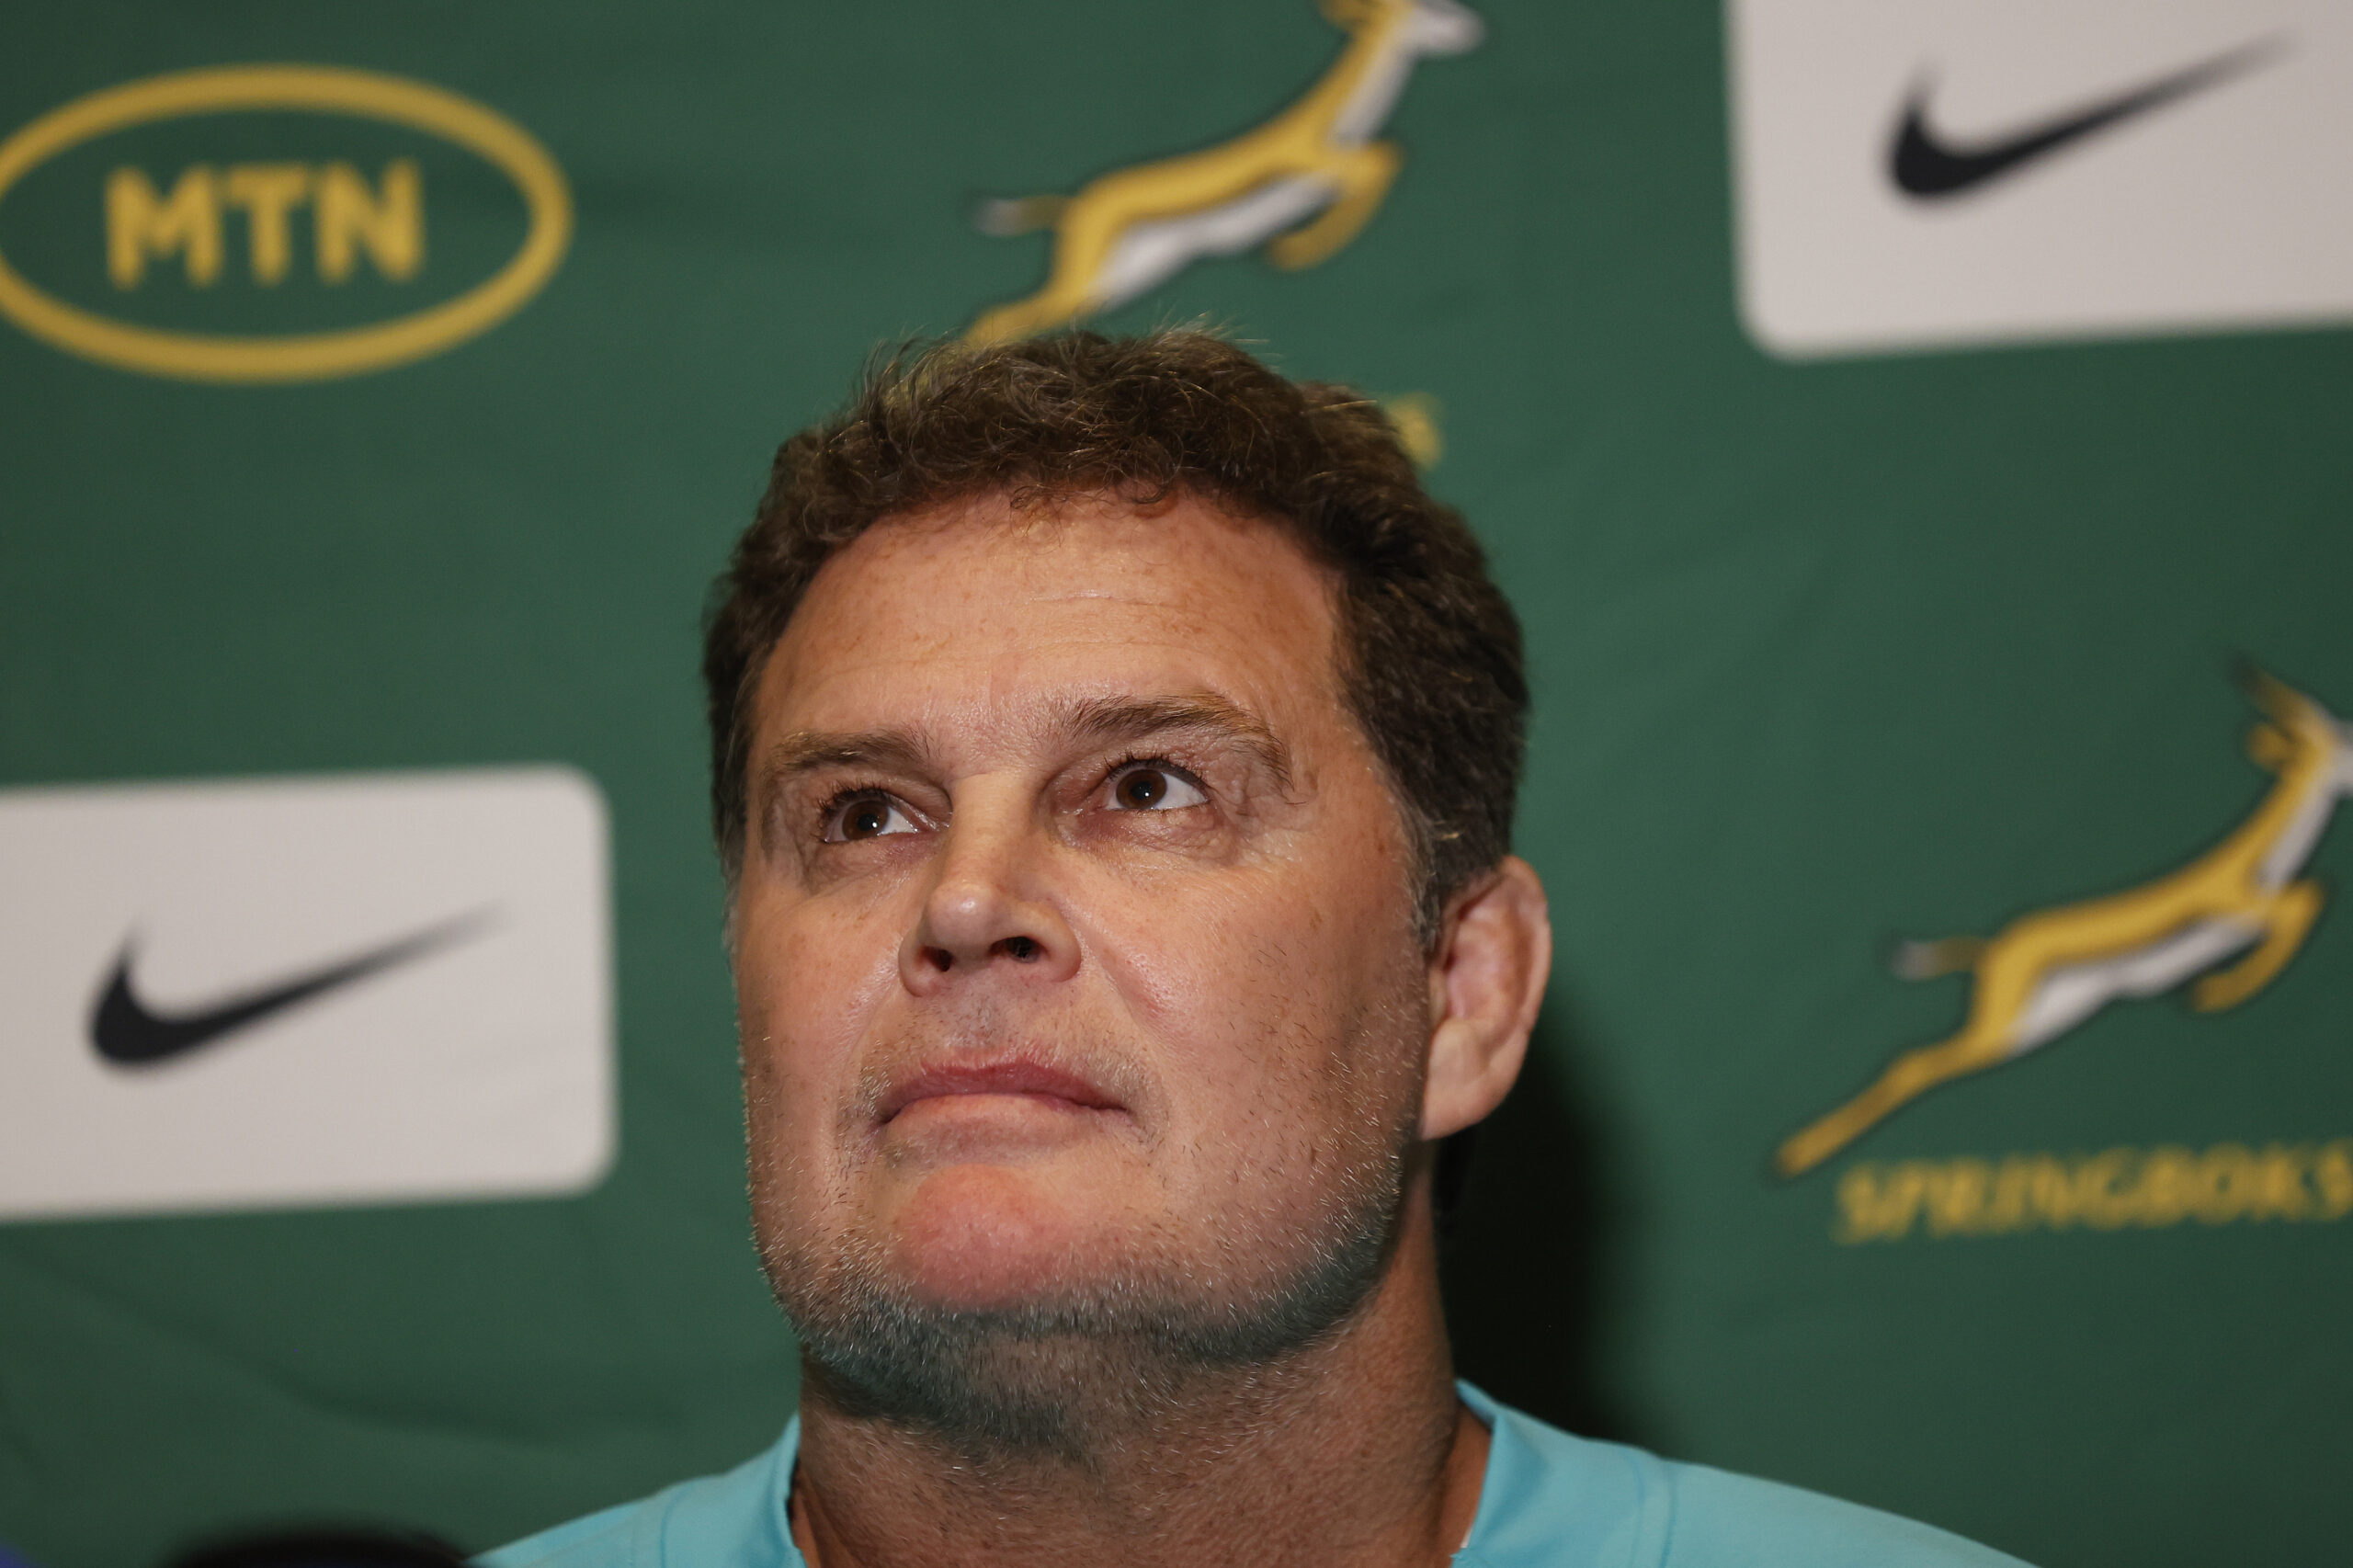 South Africa's director of rugby Rassie Erasmus. Photo: Phill Magakoe / AFP